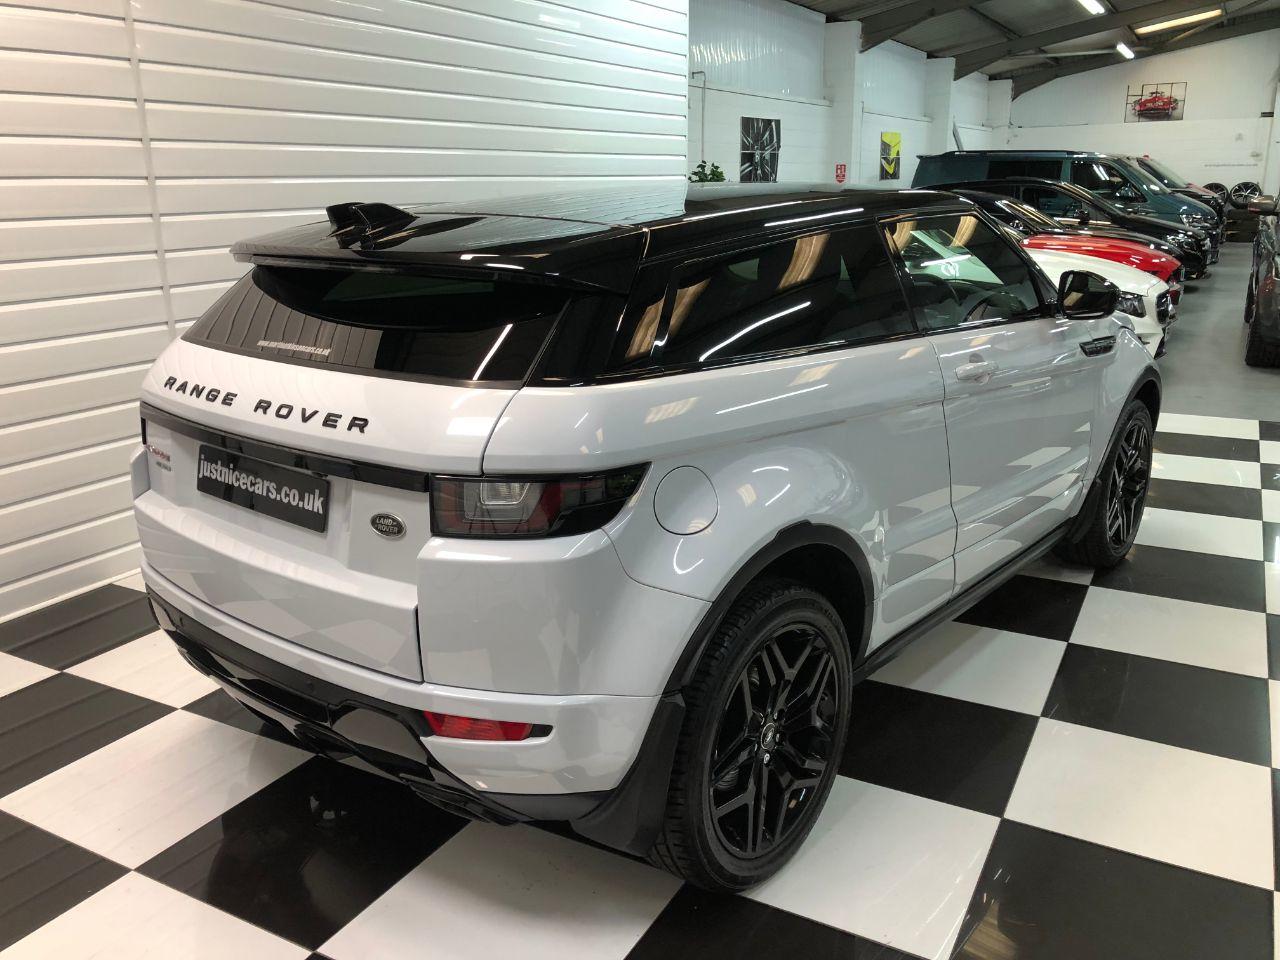 Land Rover Range Rover Evoque 2.0 TD4 HSE Dynamic 3dr Auto Coupe Diesel Yulong White